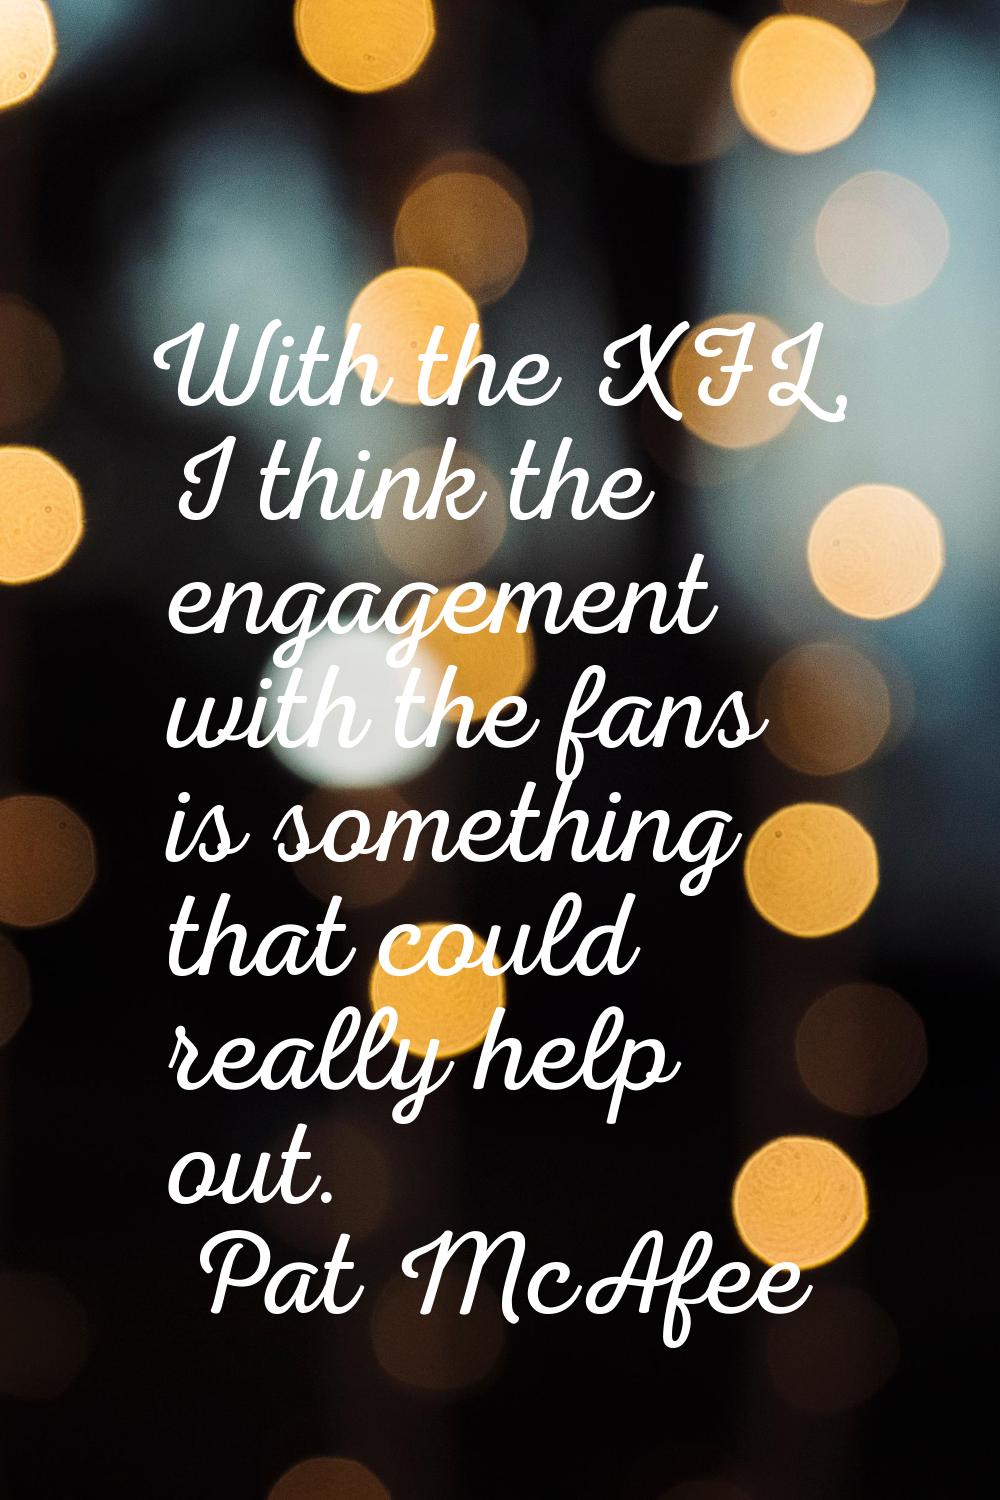 With the XFL, I think the engagement with the fans is something that could really help out.